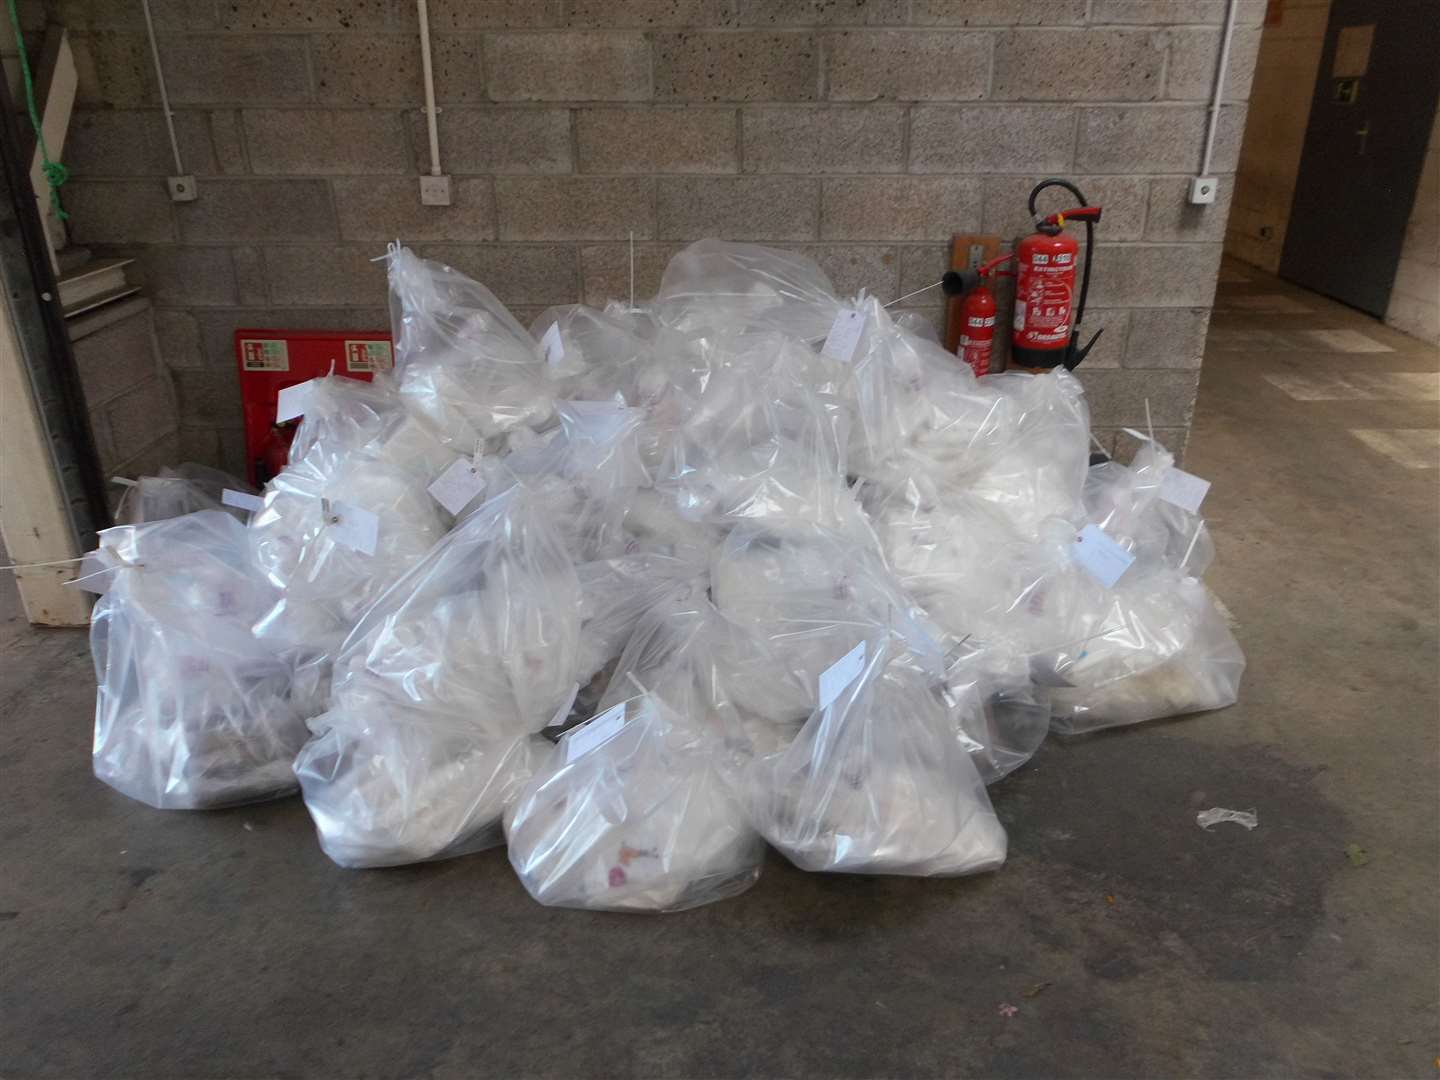 The seized drugs have a combined street value of £14million. Picture: Border Force